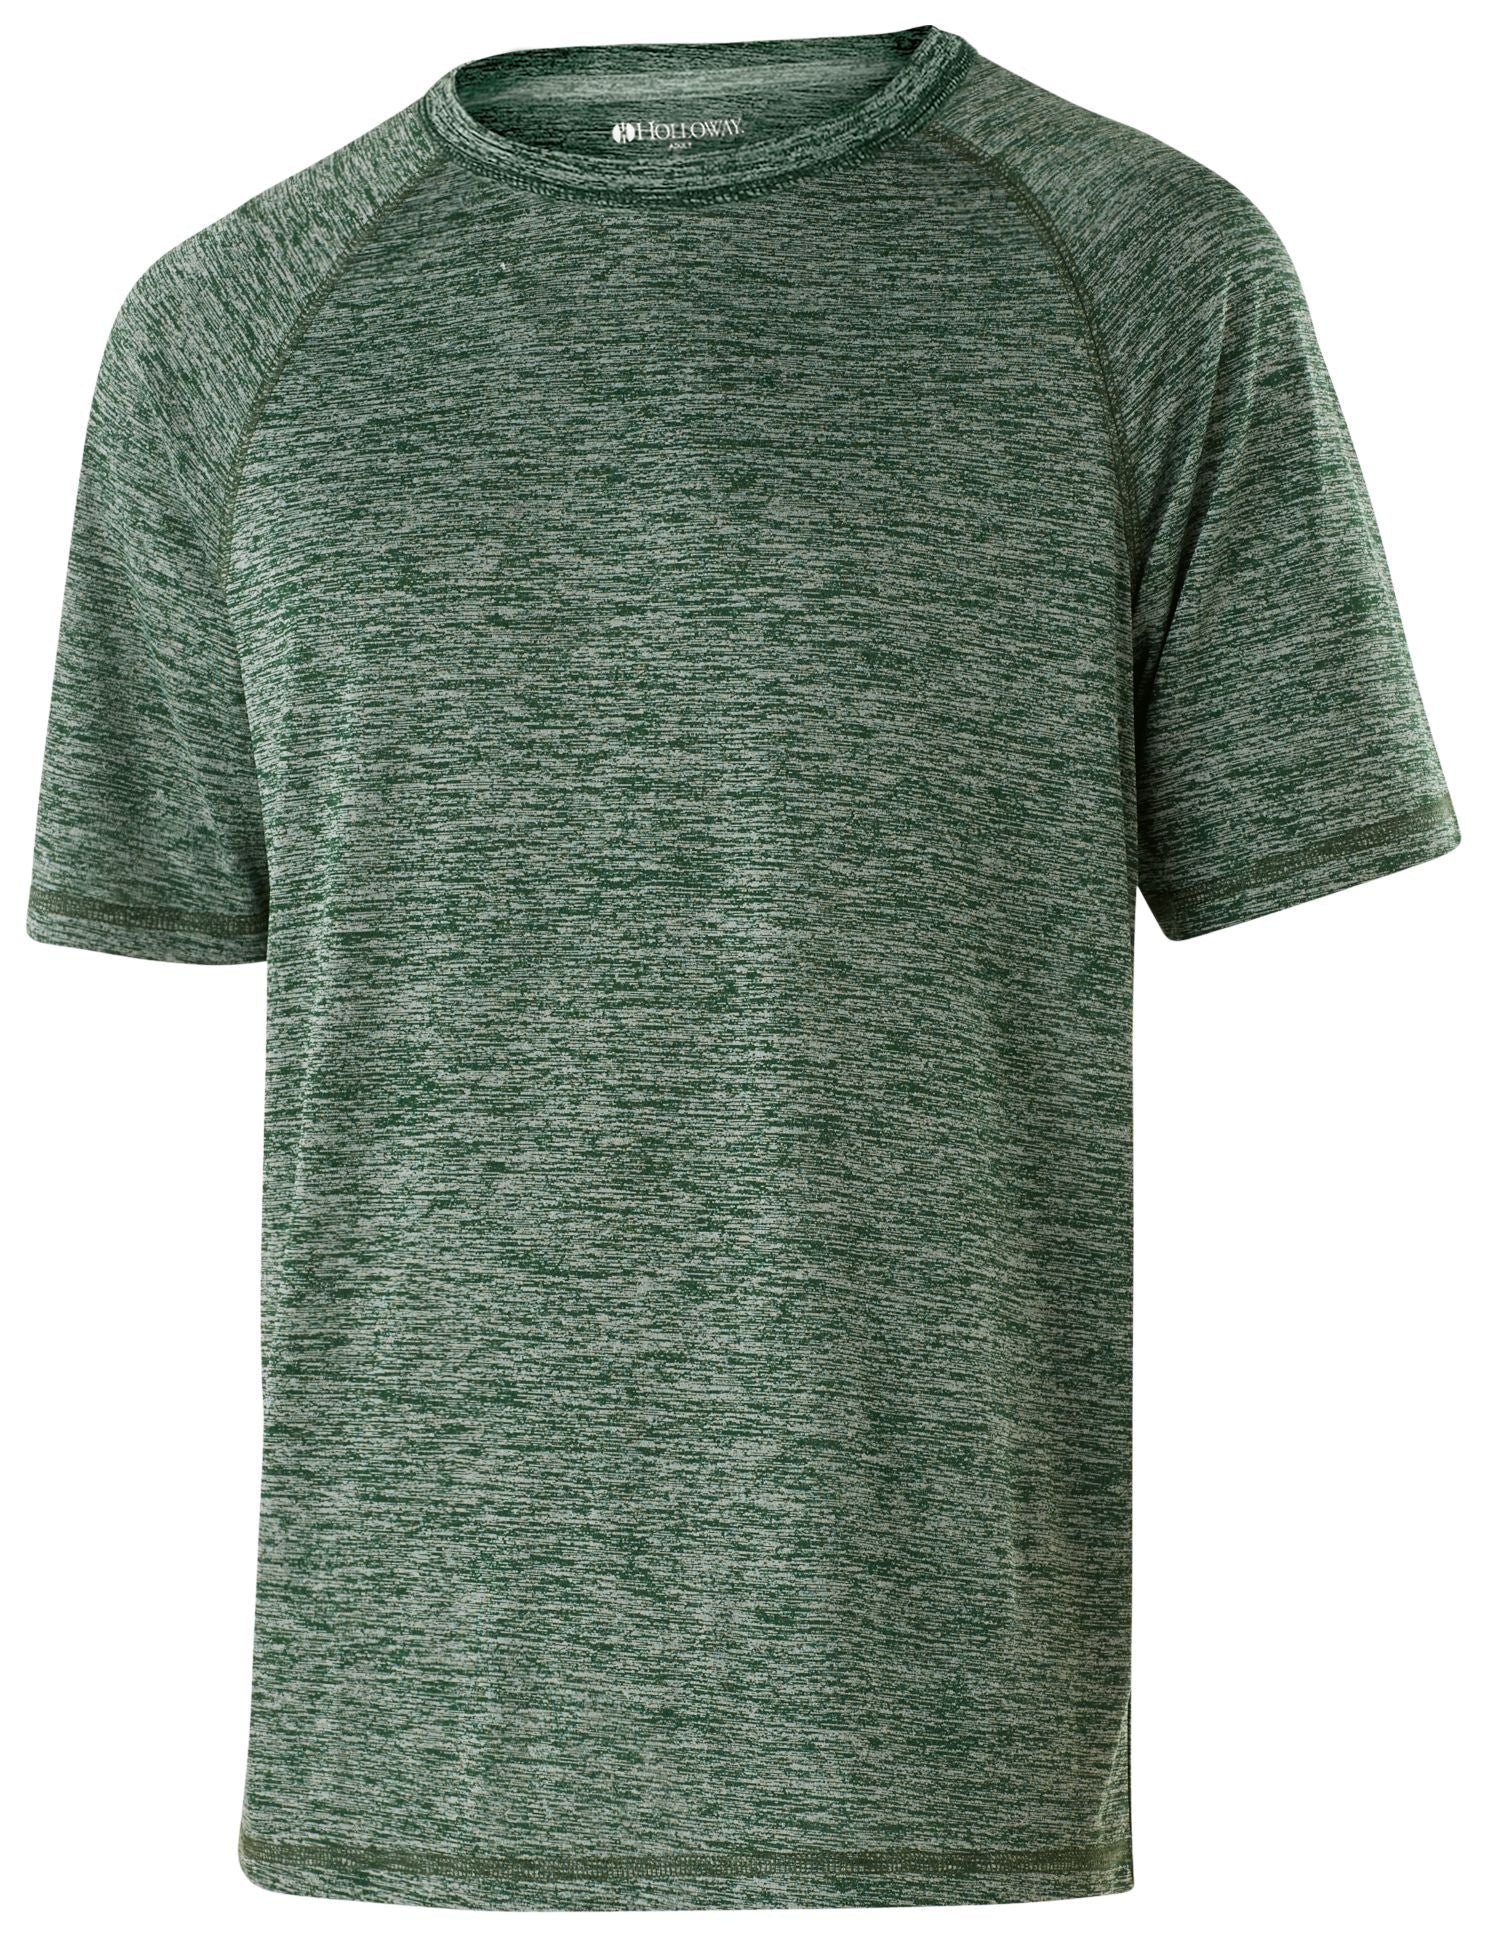 Holloway Electrify 2.0 Short Sleeve Shirt in Forest Heather  -Part of the Adult, Holloway, Shirts product lines at KanaleyCreations.com